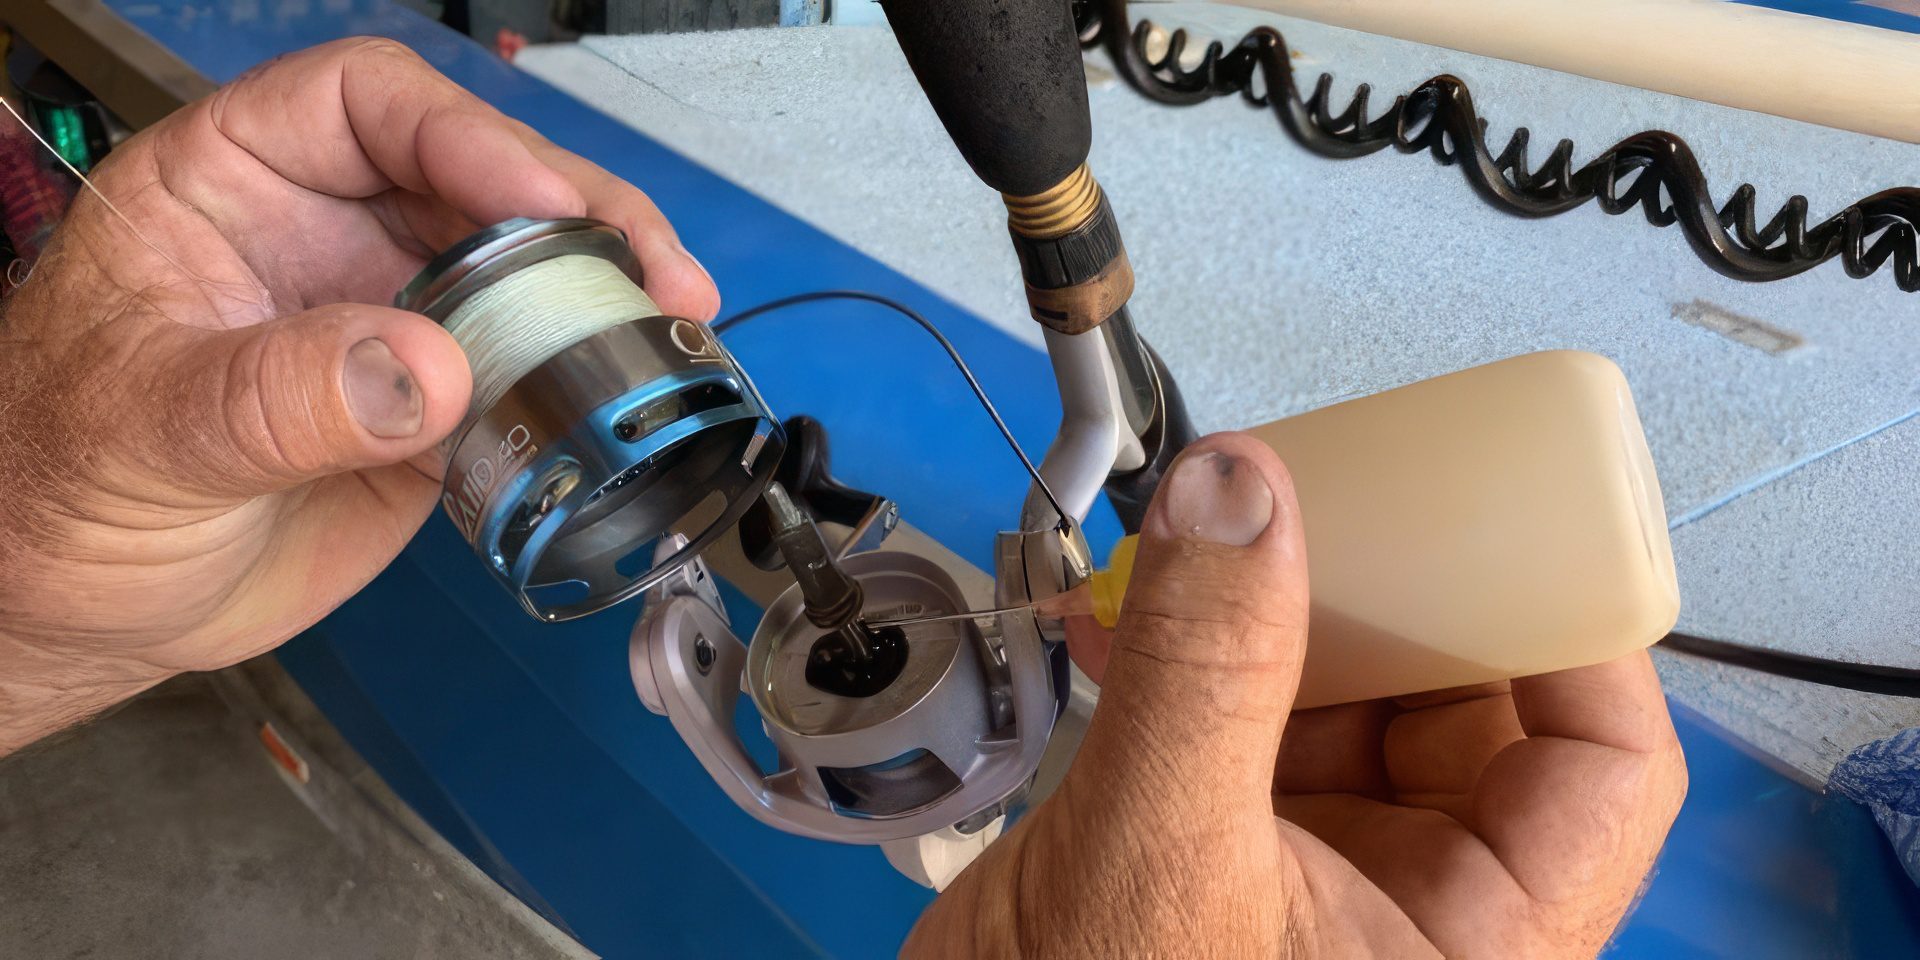 How To Oil Fishing Reel: A Step by Step Guide